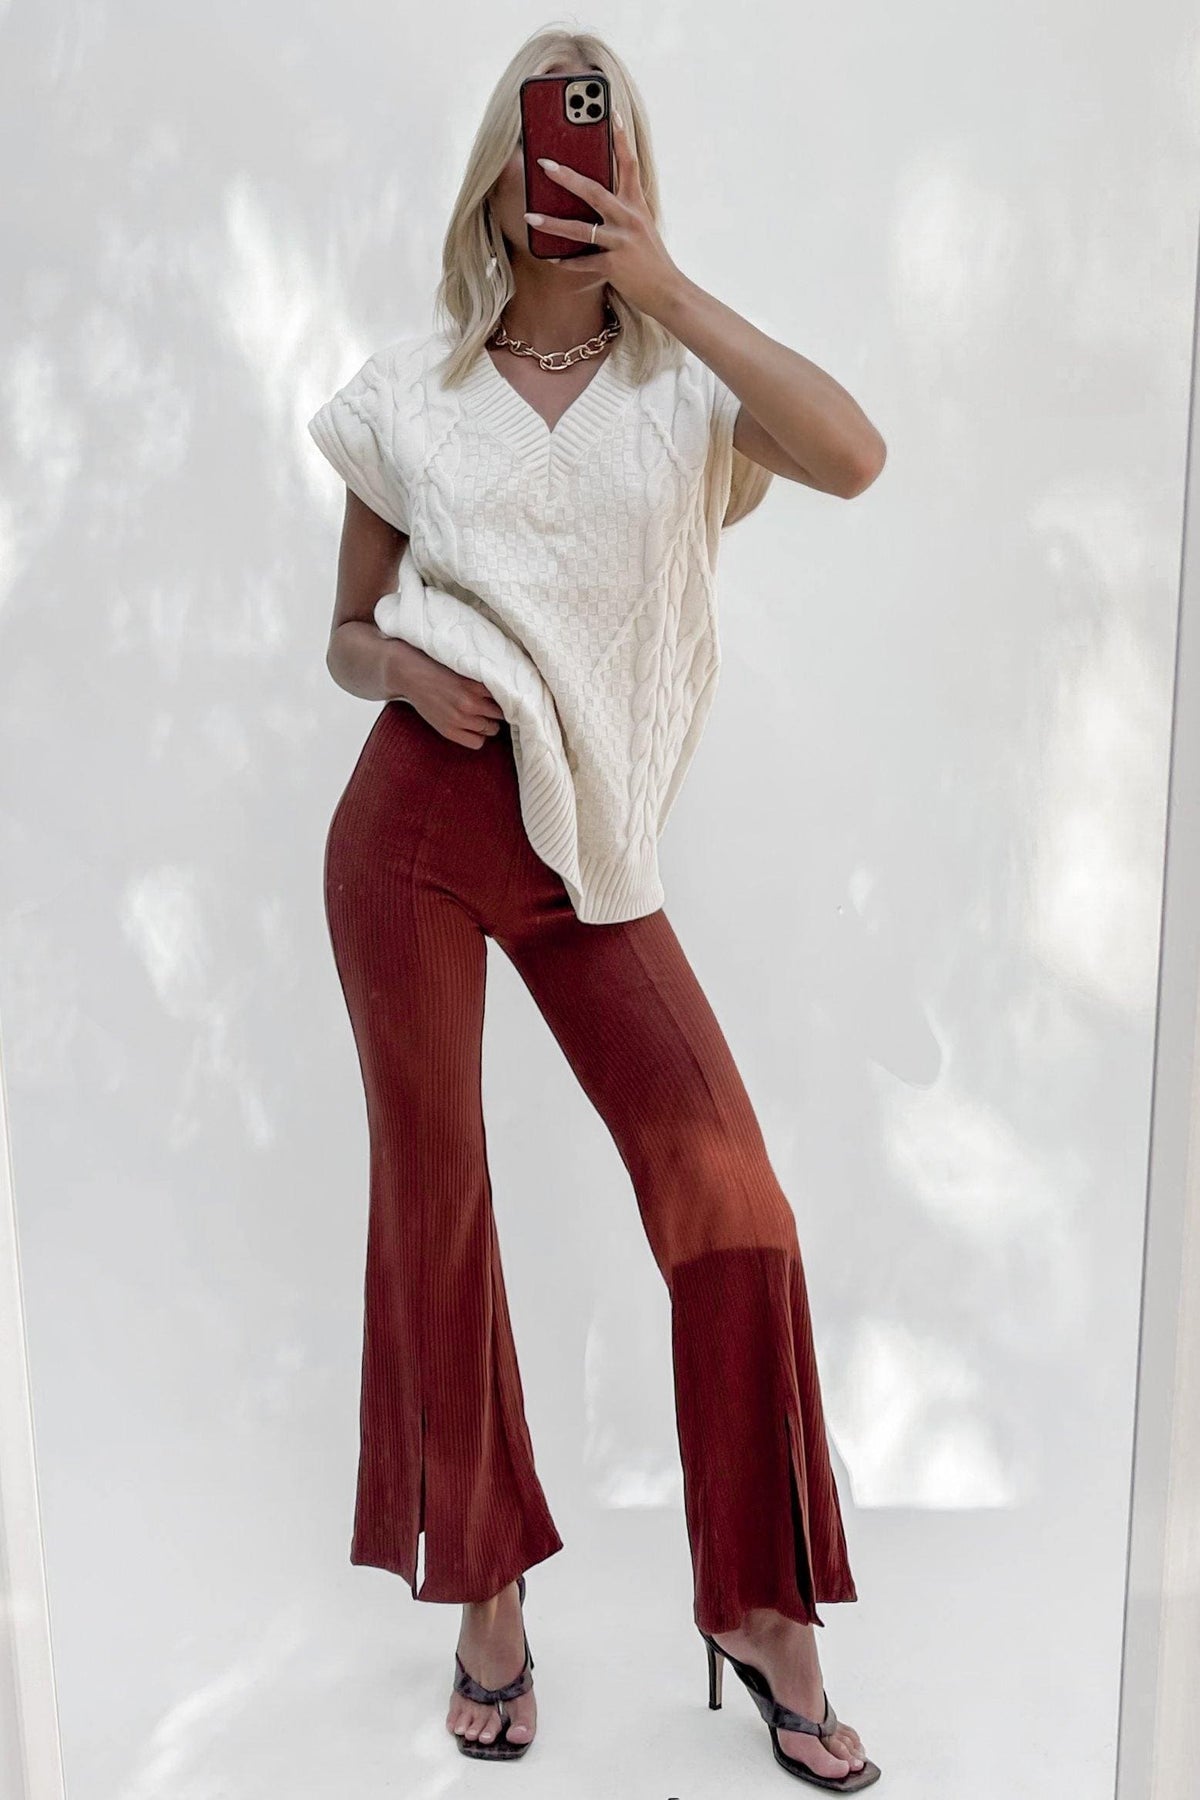 Rusty Pants, BOTTOMS, BROWN, PANTS, RED, Sale, Shop The Latest Rusty Pants Only 60.00 from MISHKAH FASHION:, Our New Rusty Pants is only $61.00-We Have The Latest Pants | Shorts | Skirts @ Mishkah Online Fashion Boutique-MISHKAH